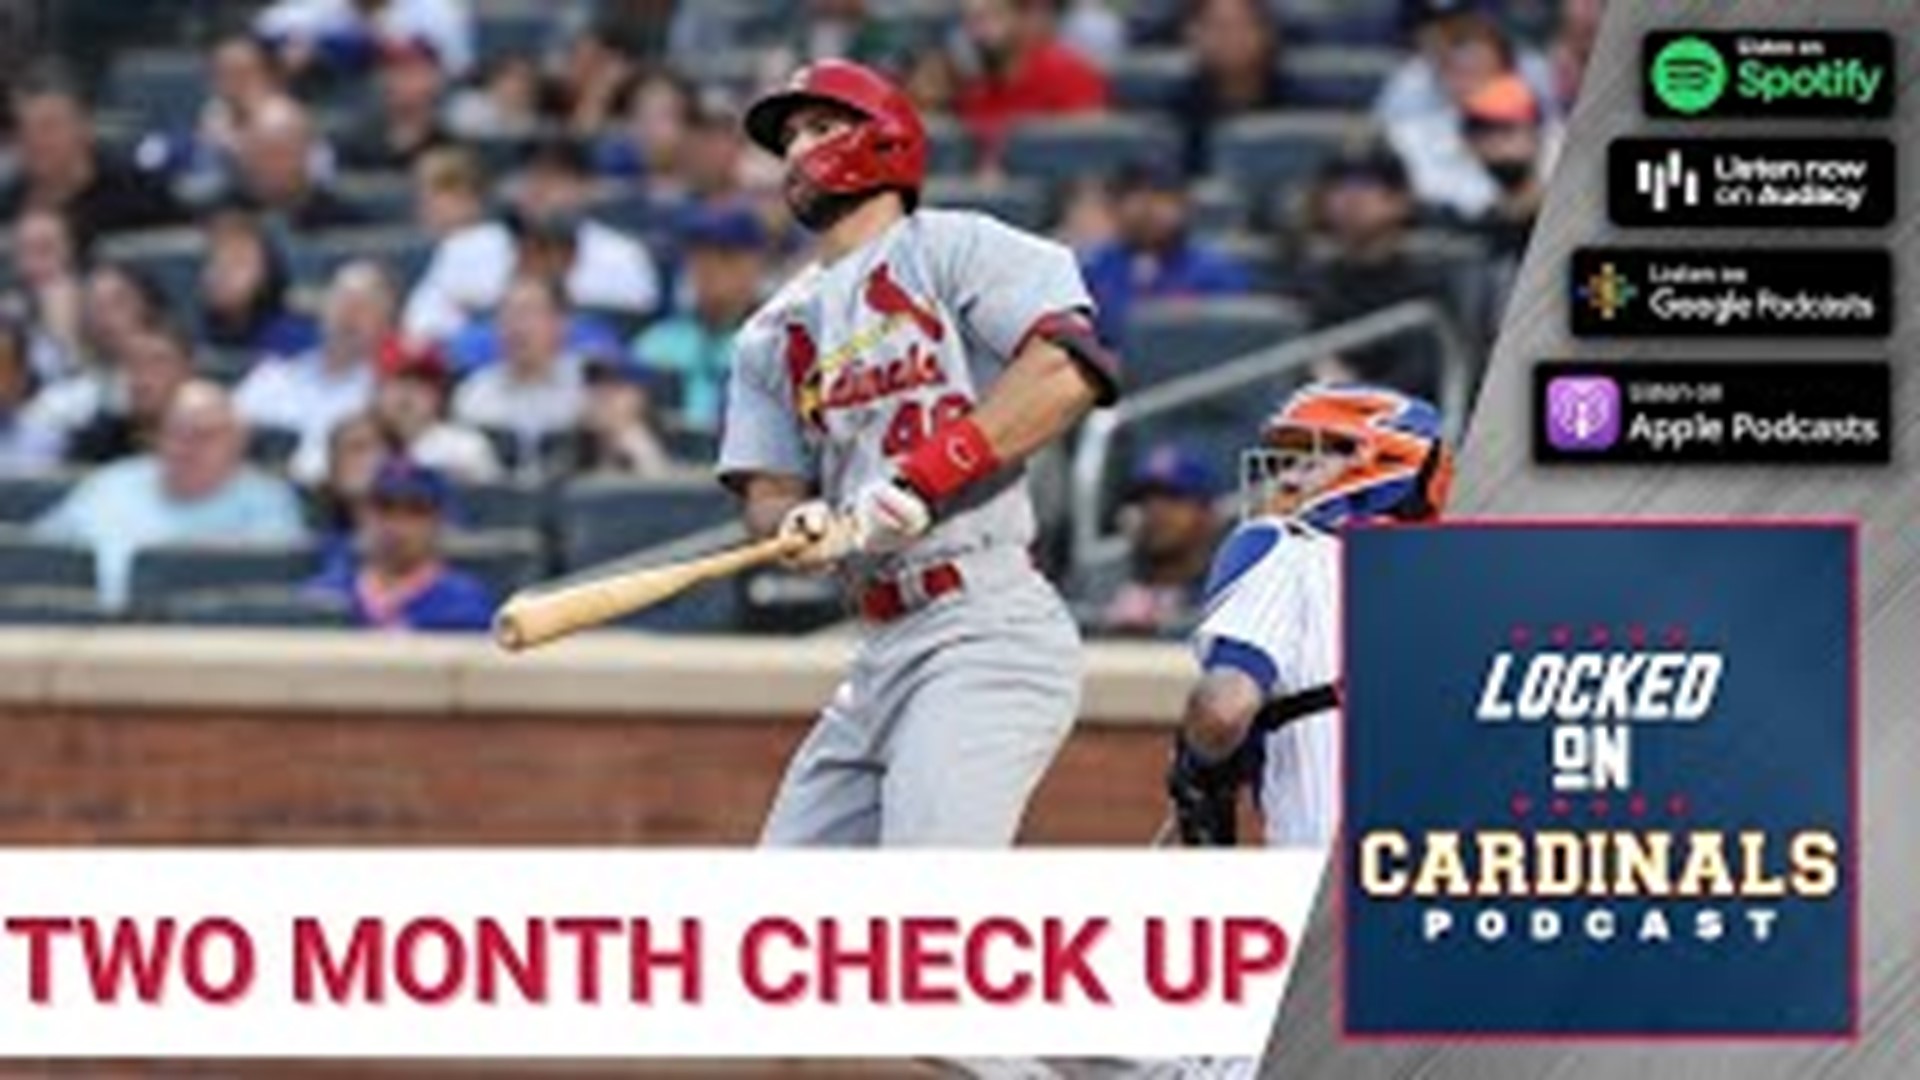 May 2022 was just as good (if not better than) May 2021 for the St. Louis Cardinals. The Cardinals will now look to avoid a disastrous June like they had last year.